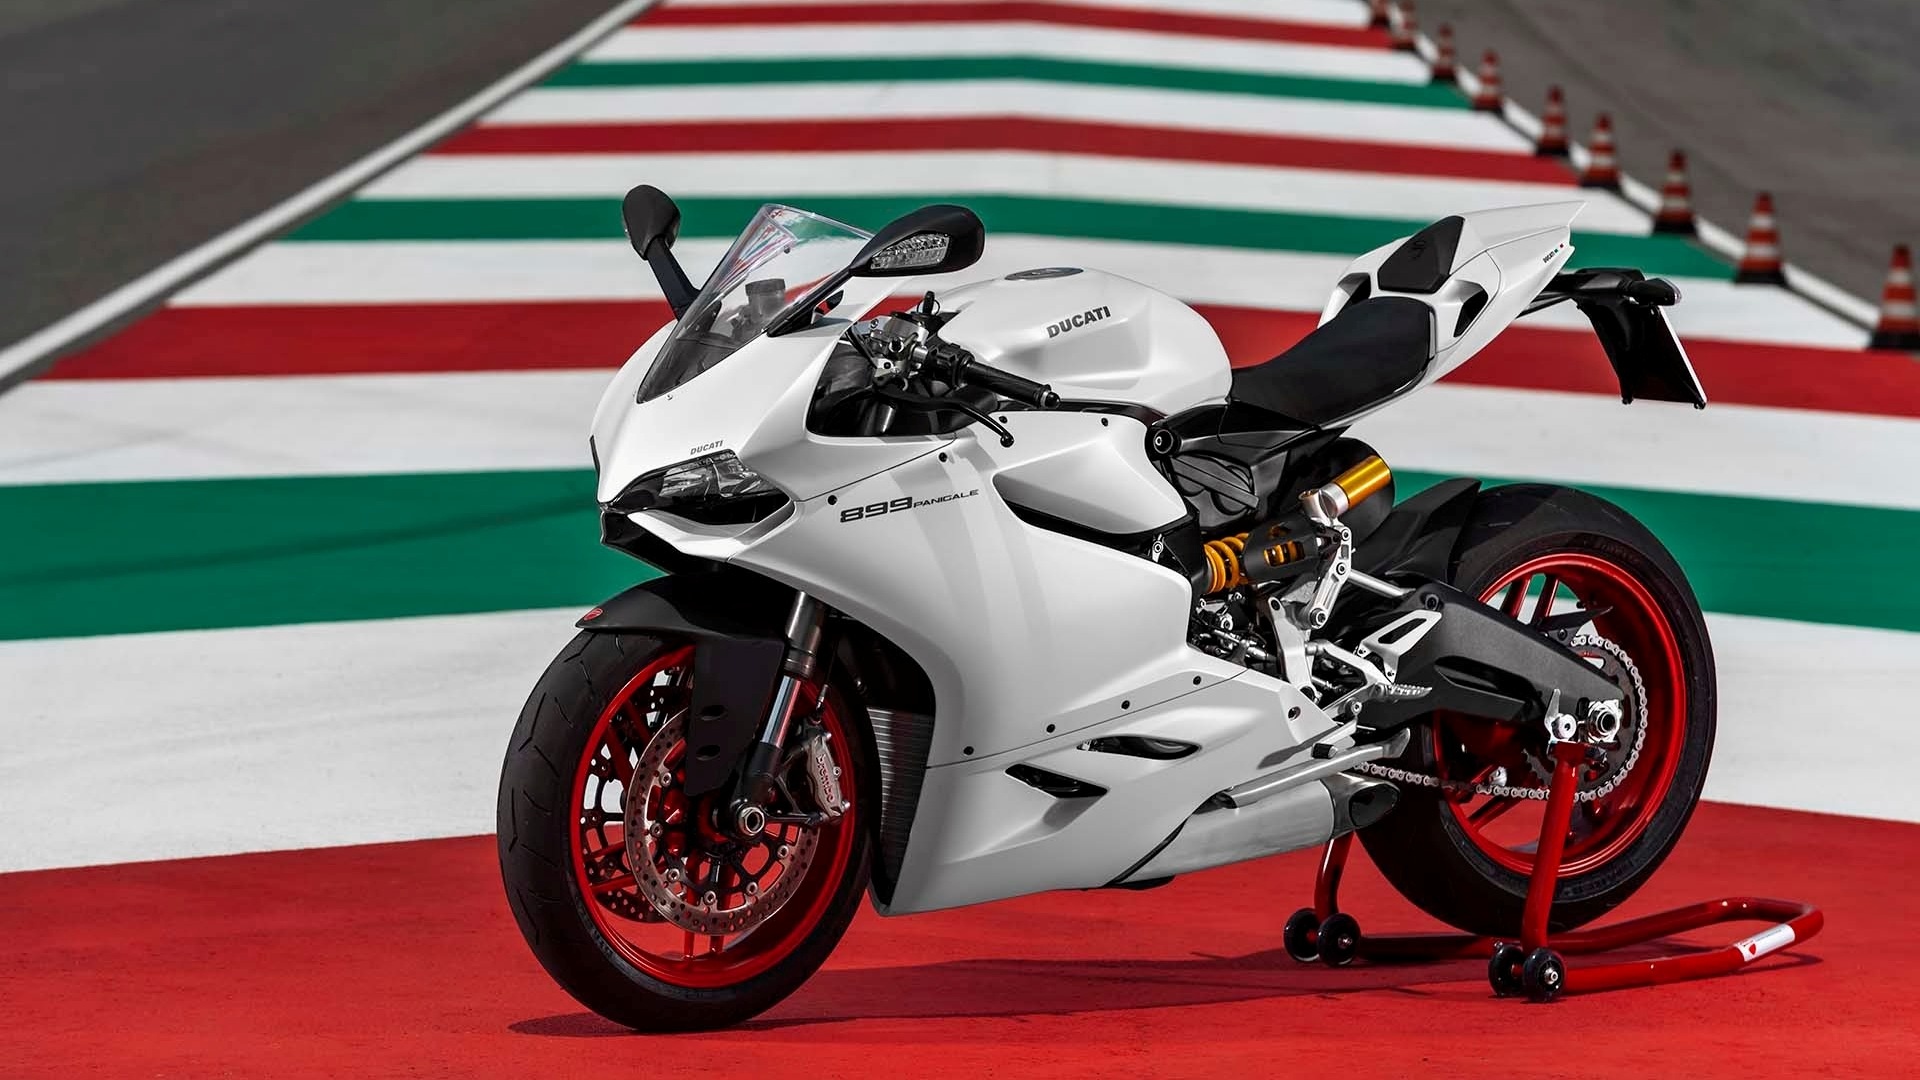 Ducati Superbike 899 Panigale 2014 Wallpapers   1920x1080   455202